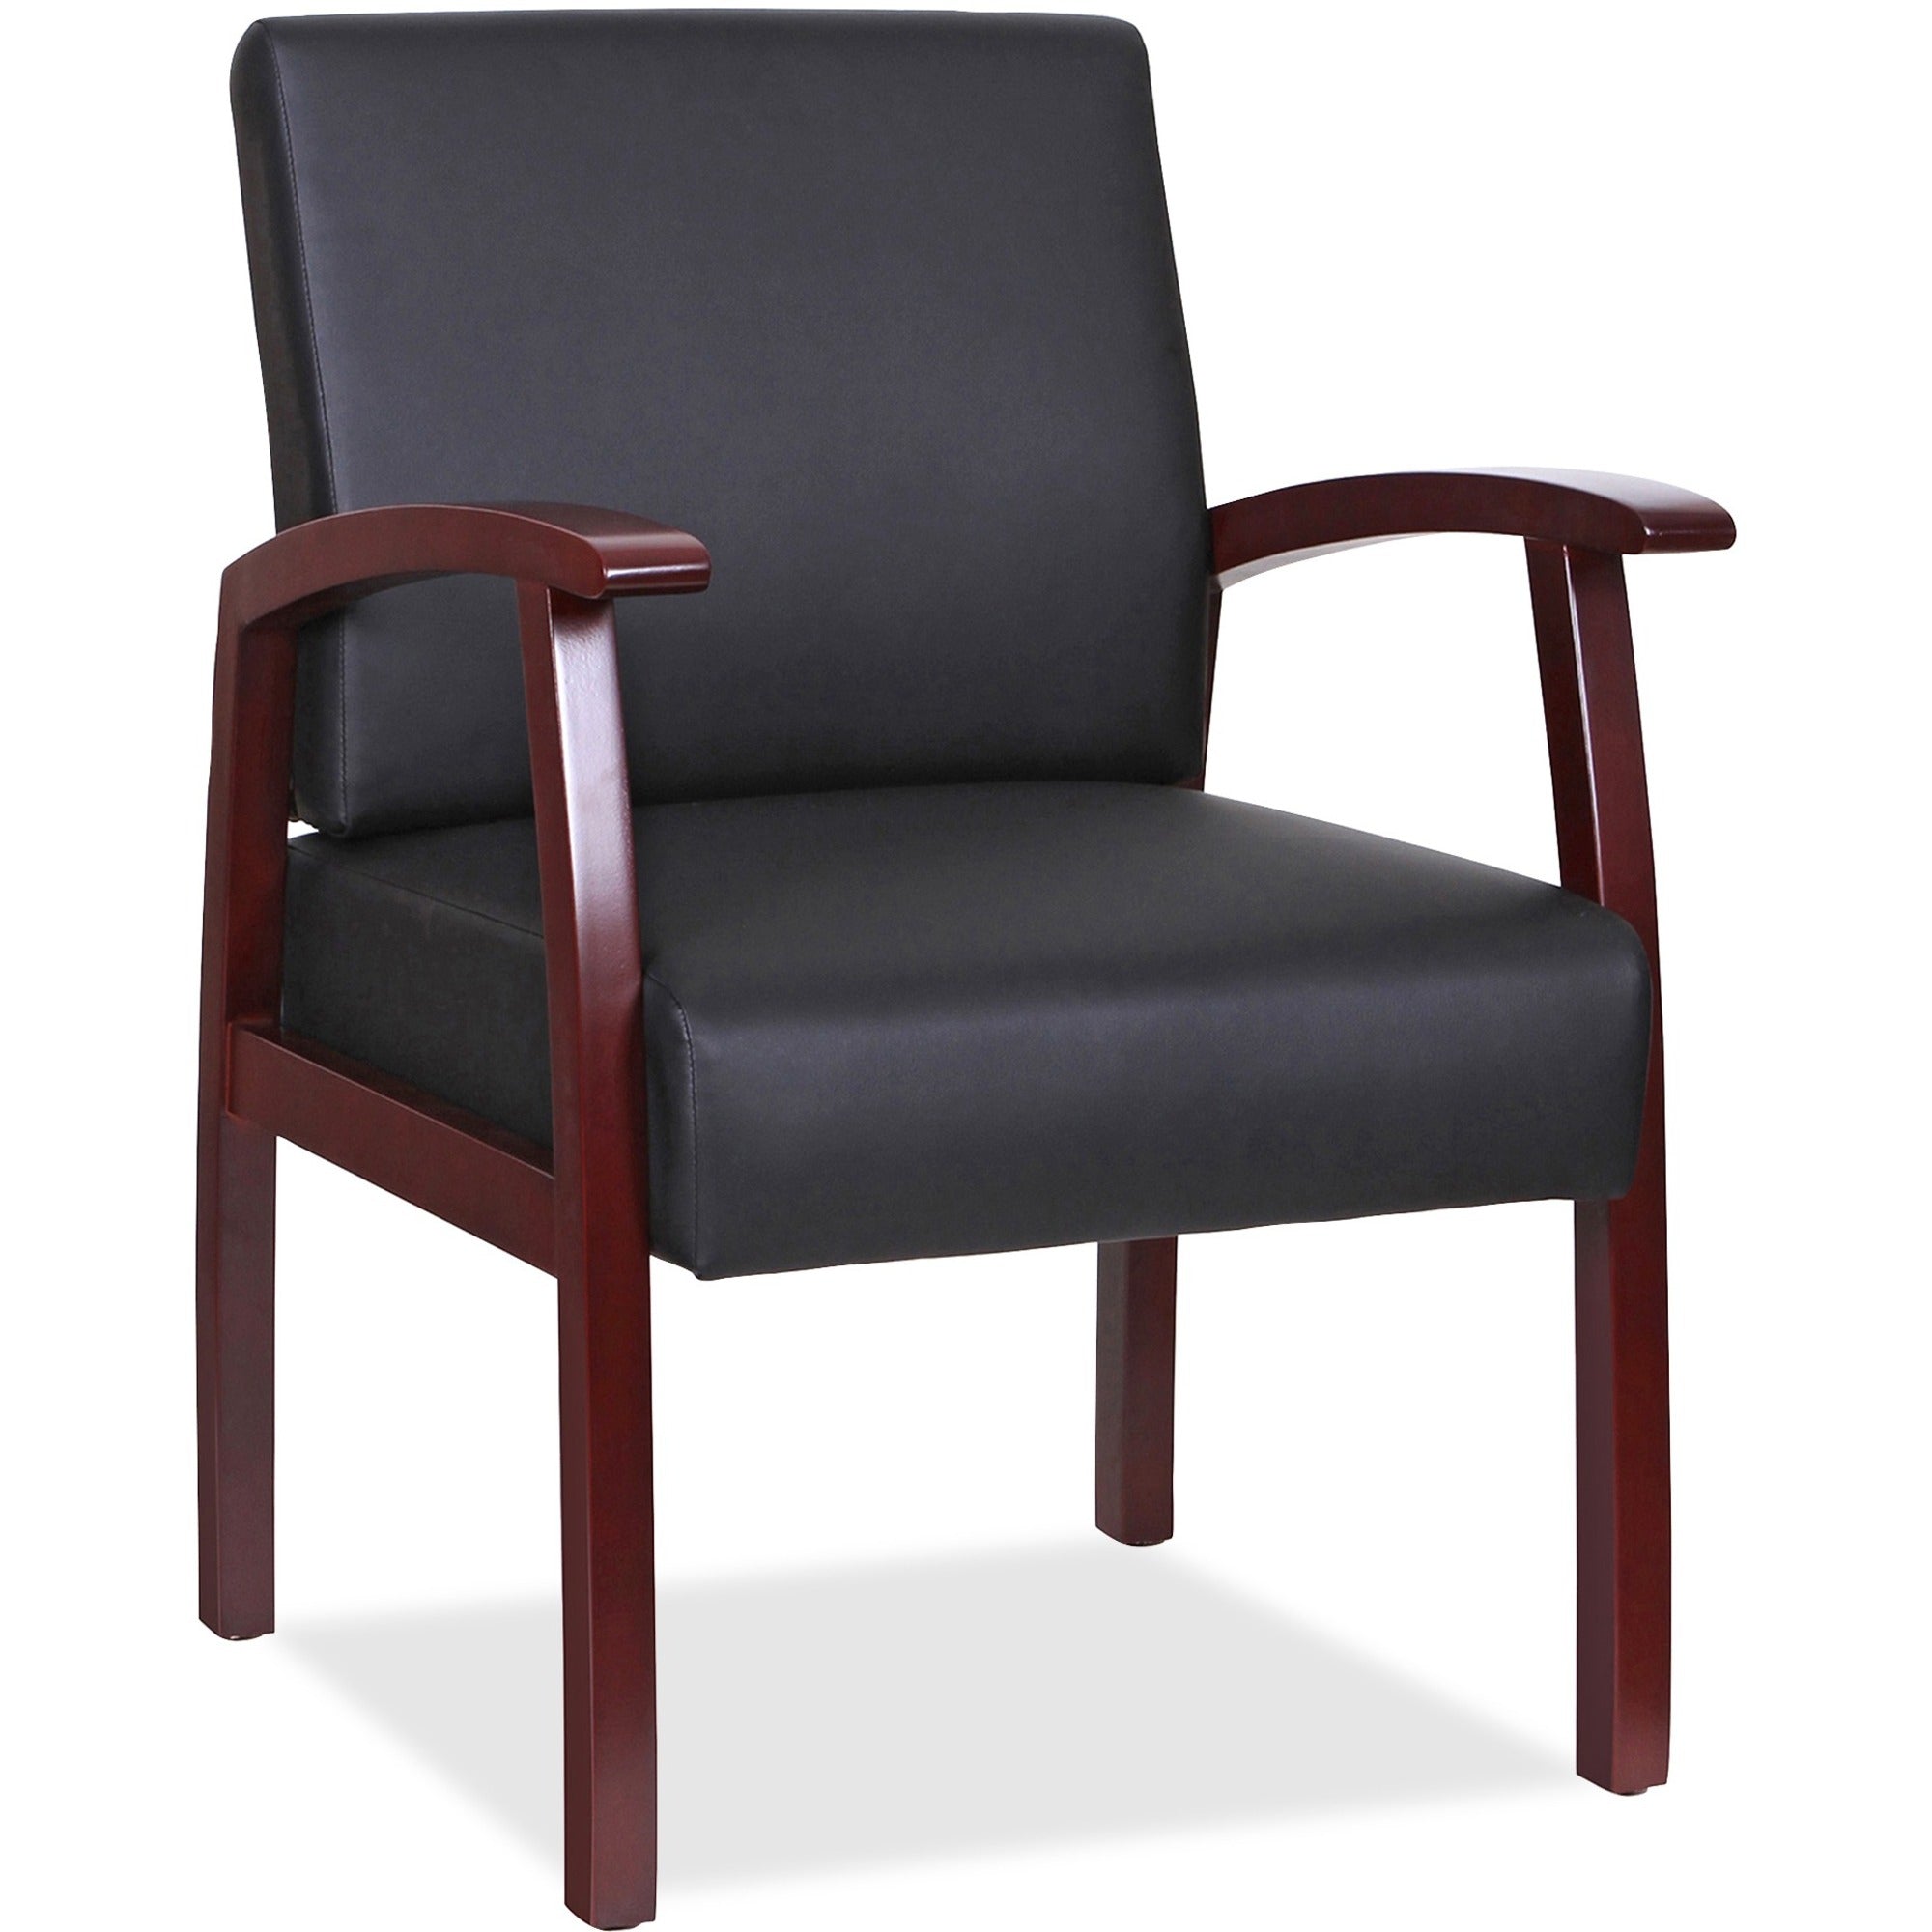 lorell-thickly-padded-guest-chair-mahogany-wood-frame-four-legged-base-black-leather-armrest-1-each_llr68556 - 1